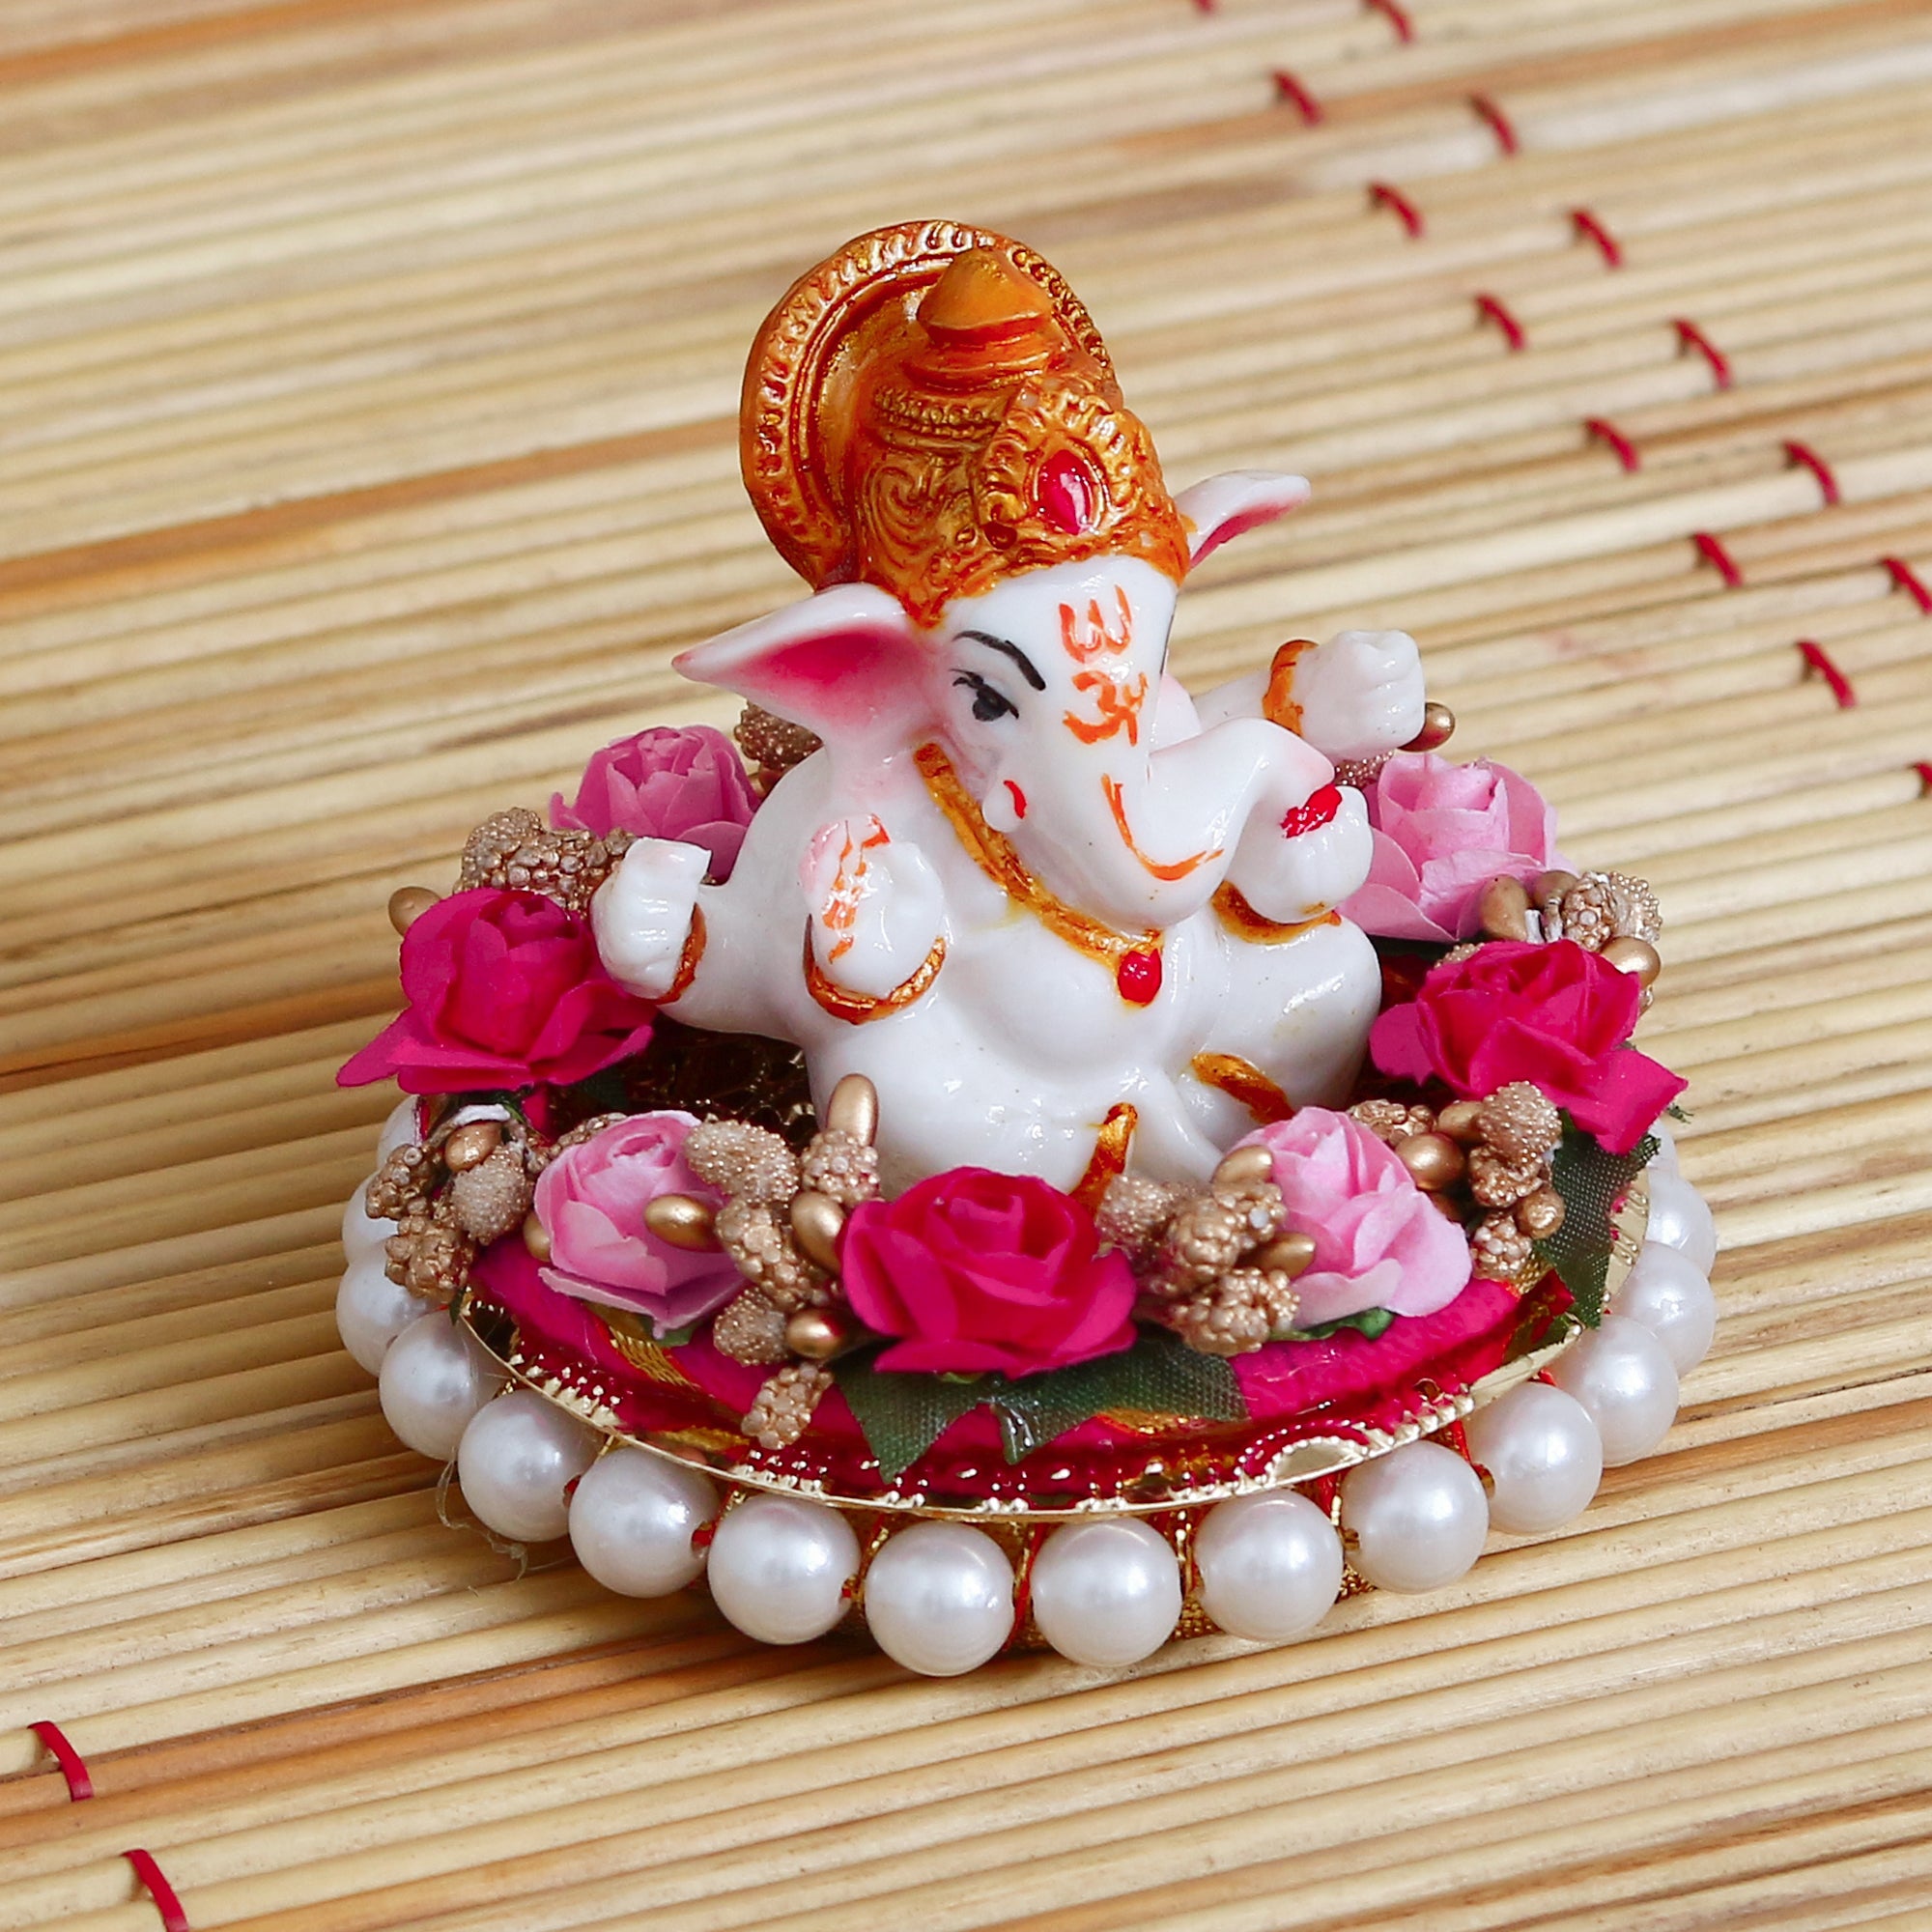 Lord Ganesha Idol On Decorative Handcrafted Colorful Flowers Plate 1